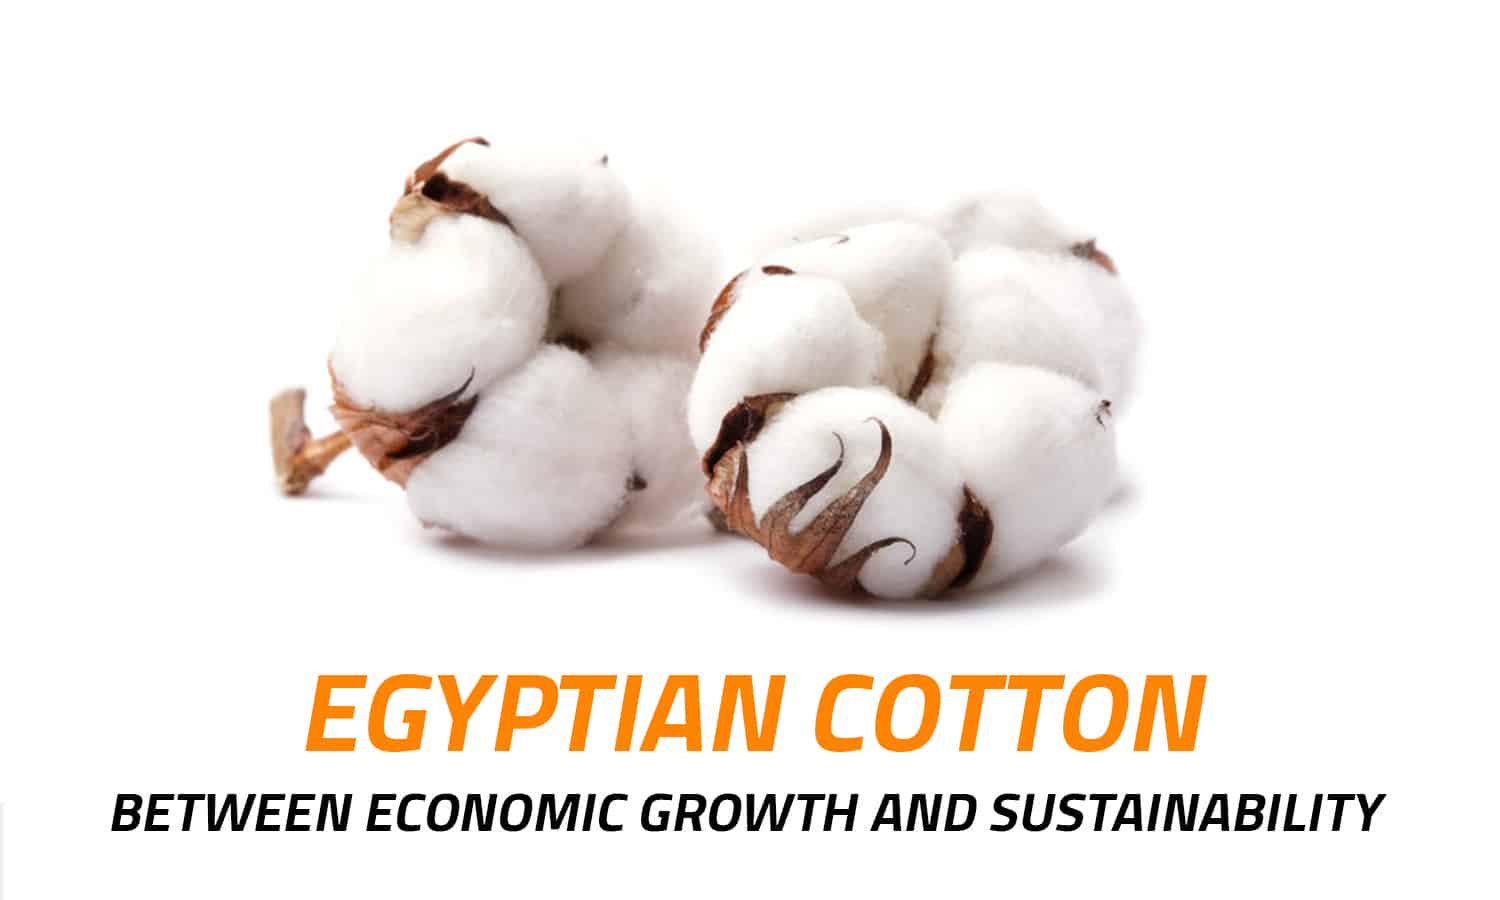 Egyptian Cotton: Between Economic Growth and Sustainability

